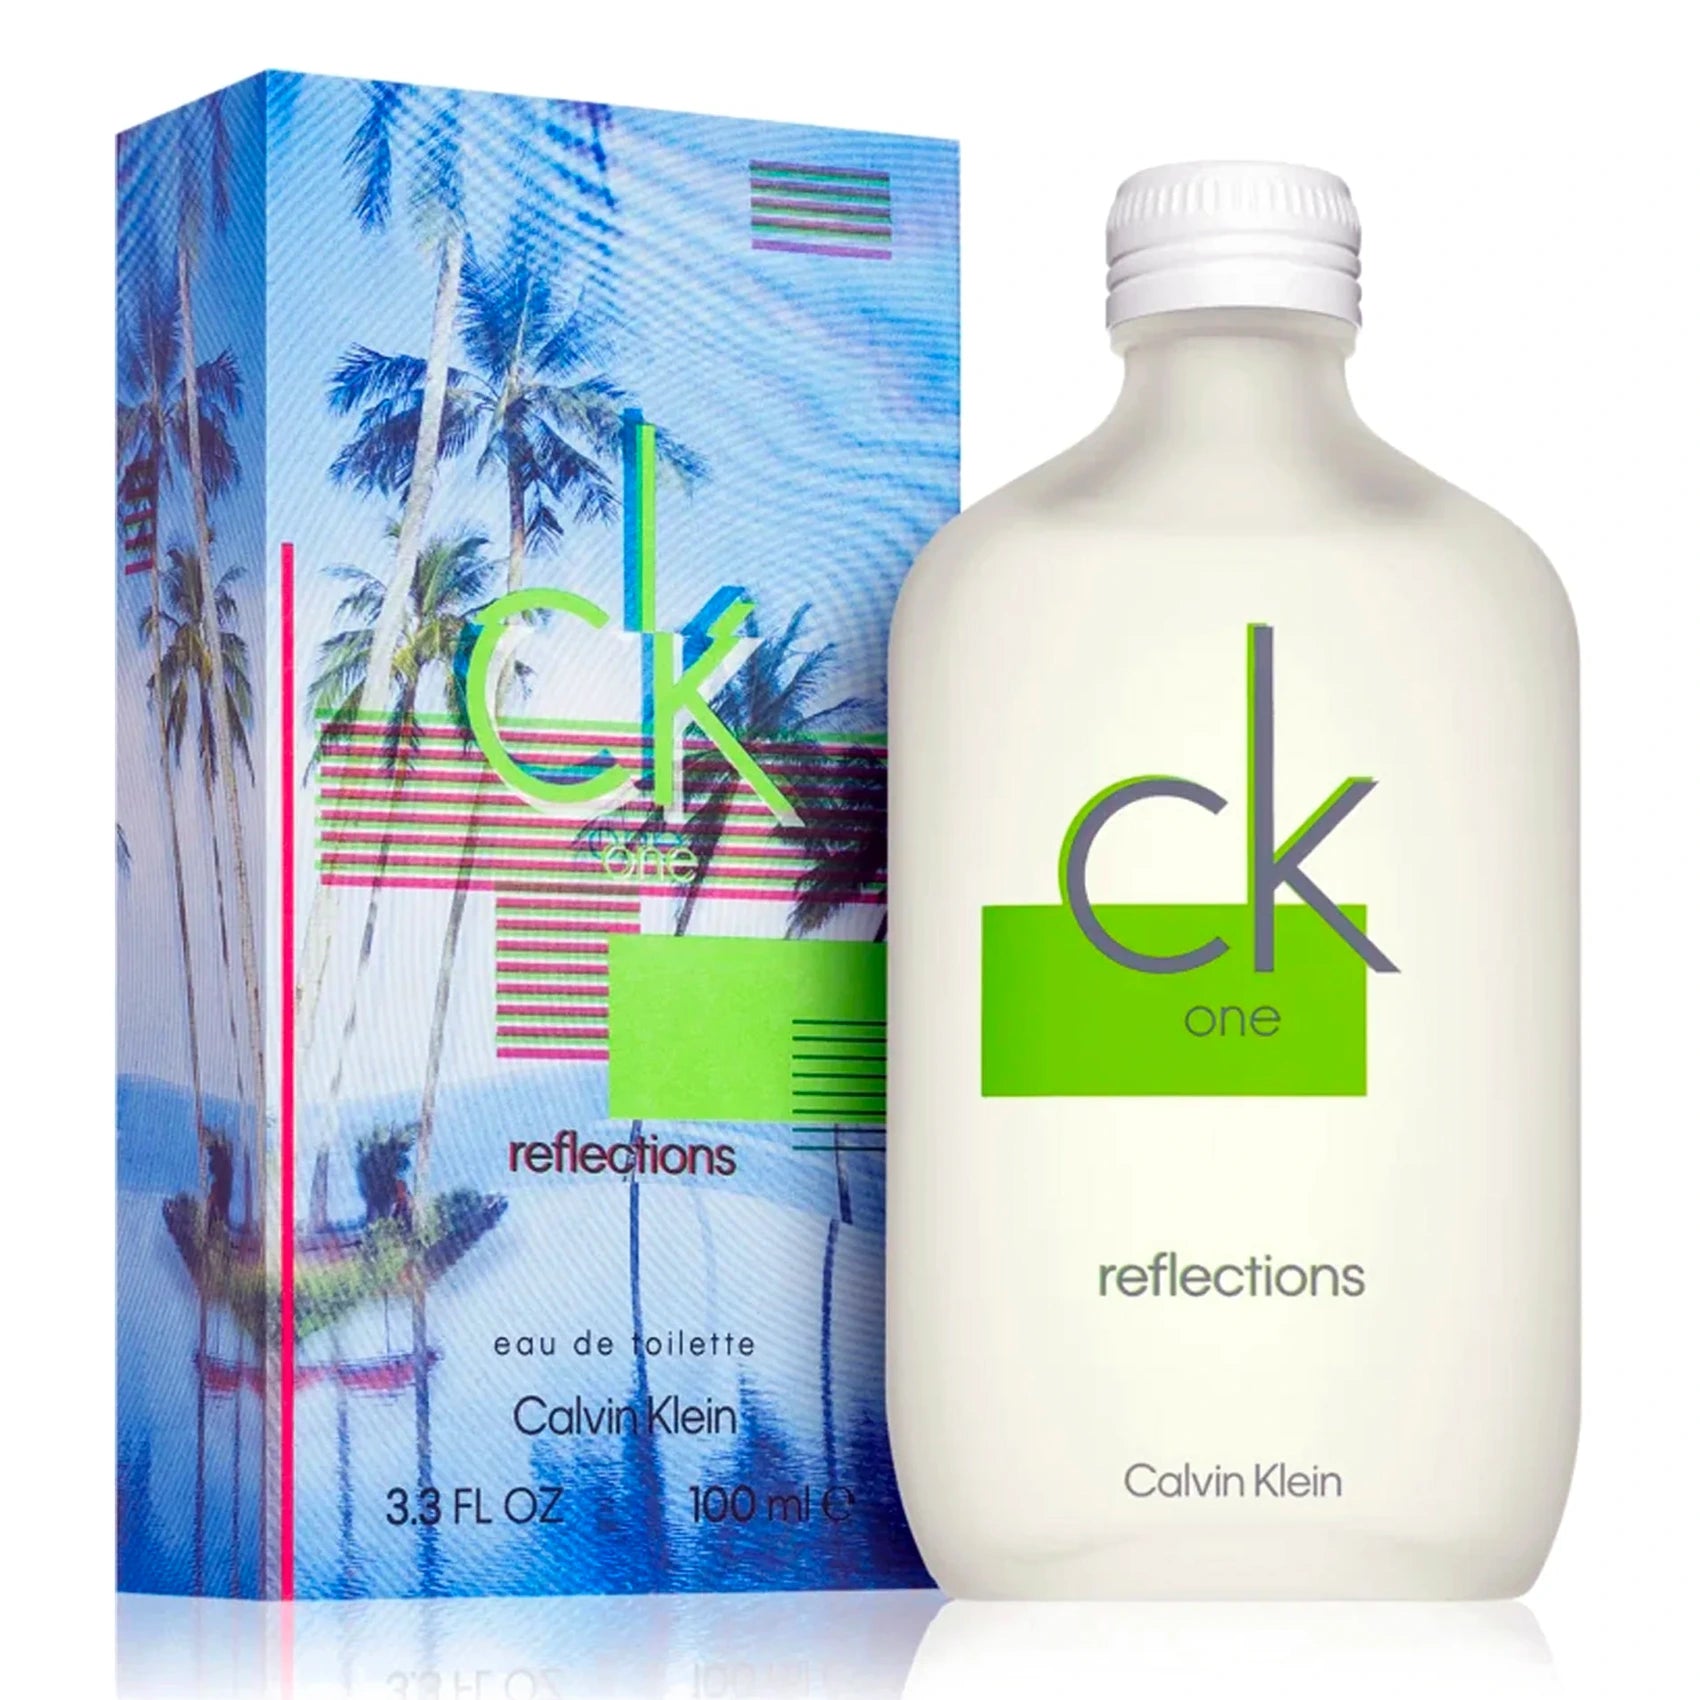 CK One Shock 6.7 oz EDT for women – LaBellePerfumes